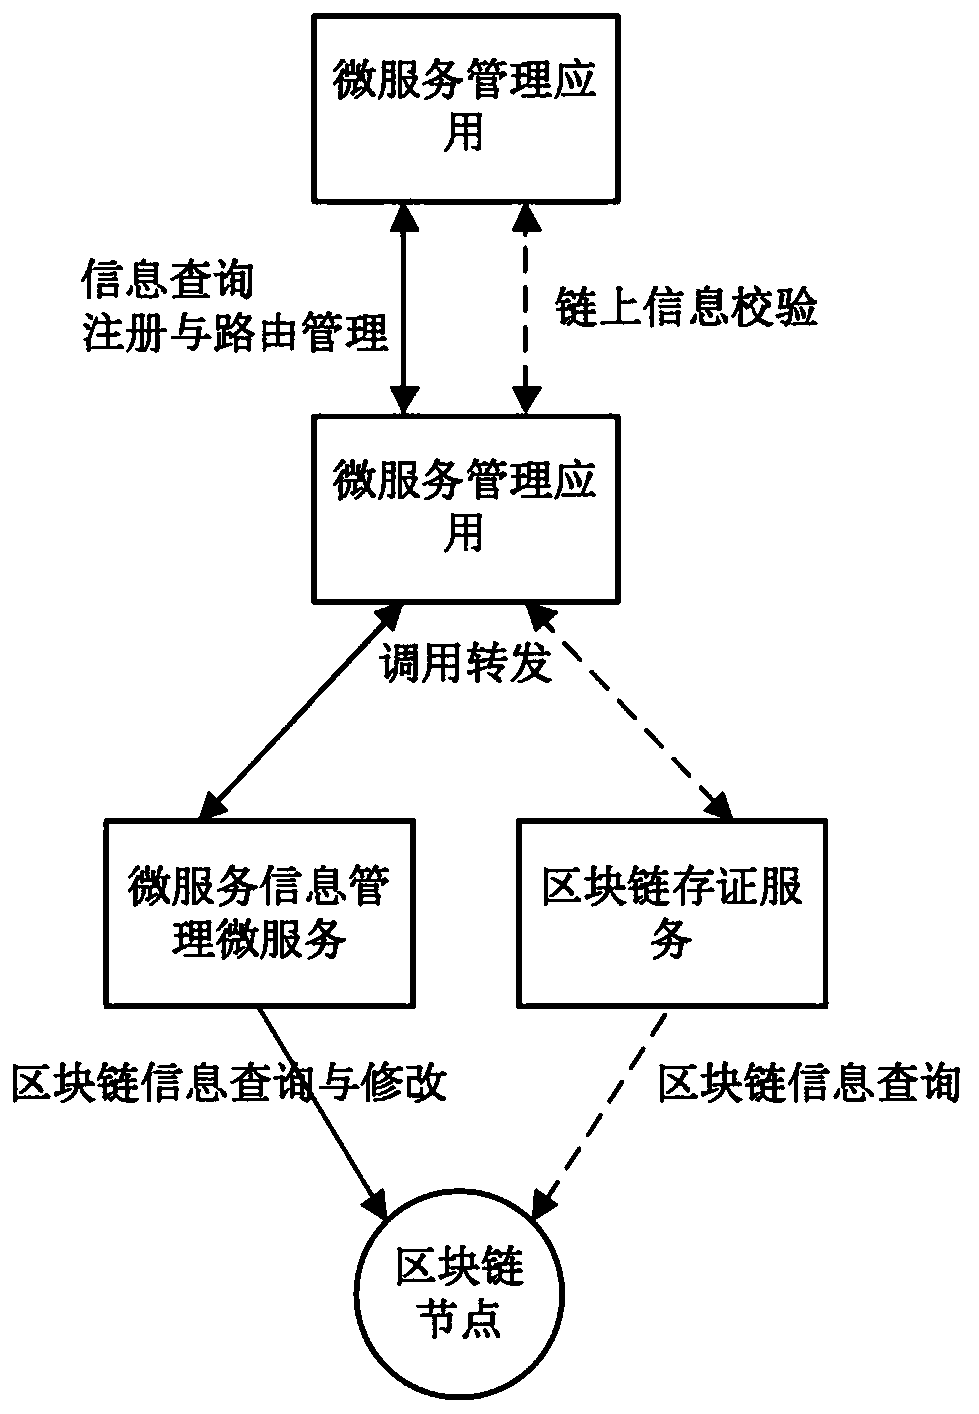 Distributed micro-service governance system and construction method thereof